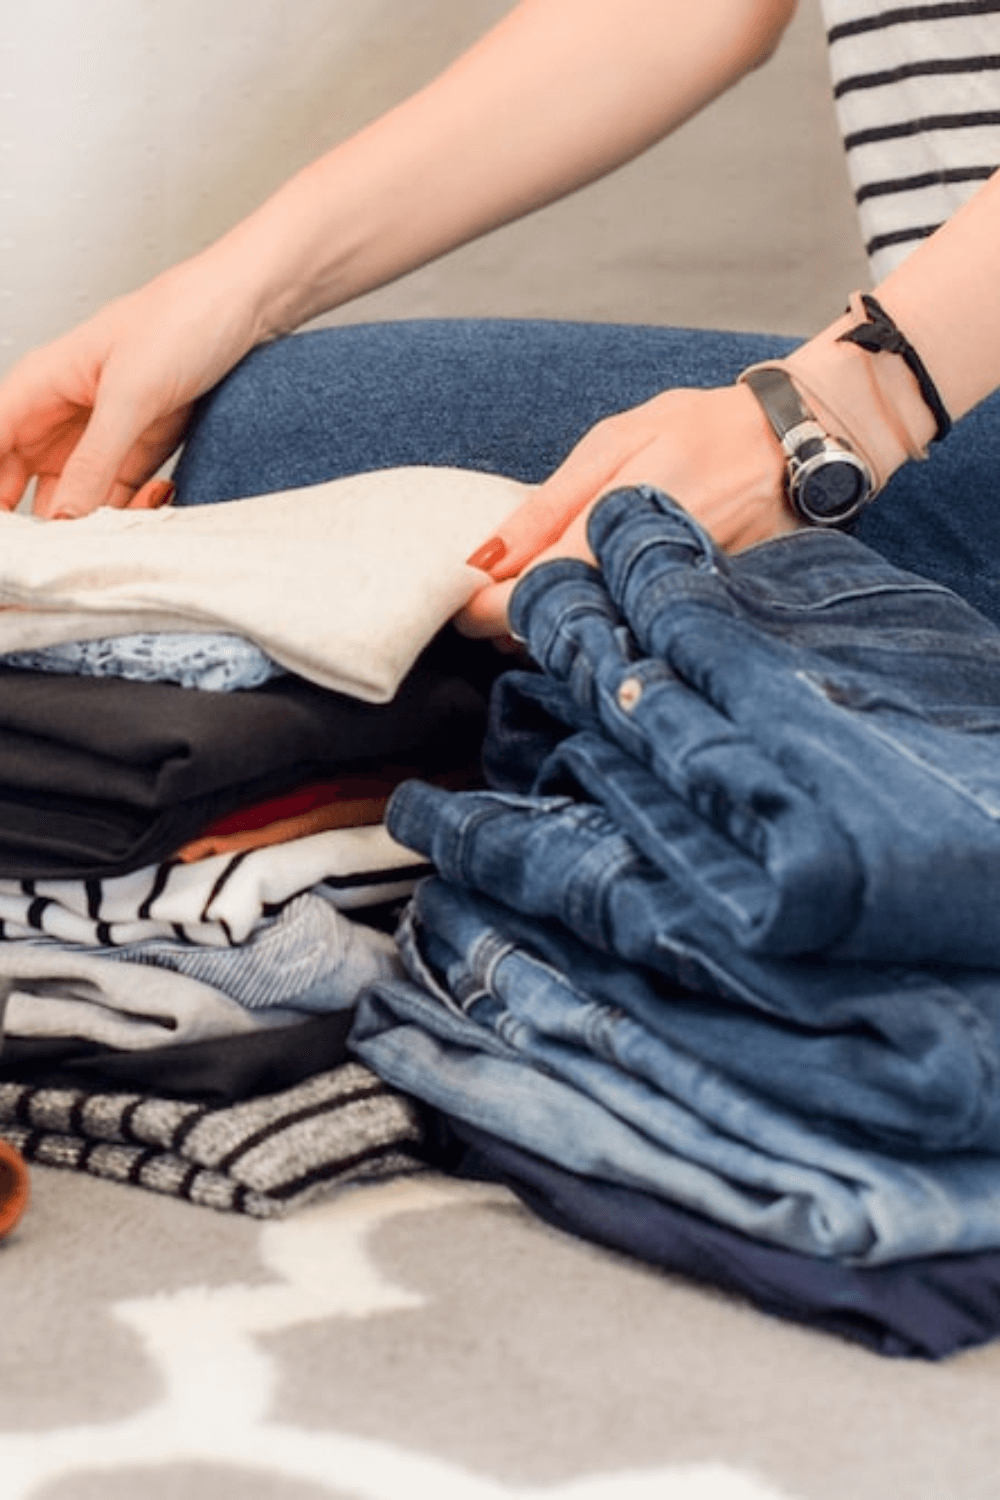 A woman is sorting clothes